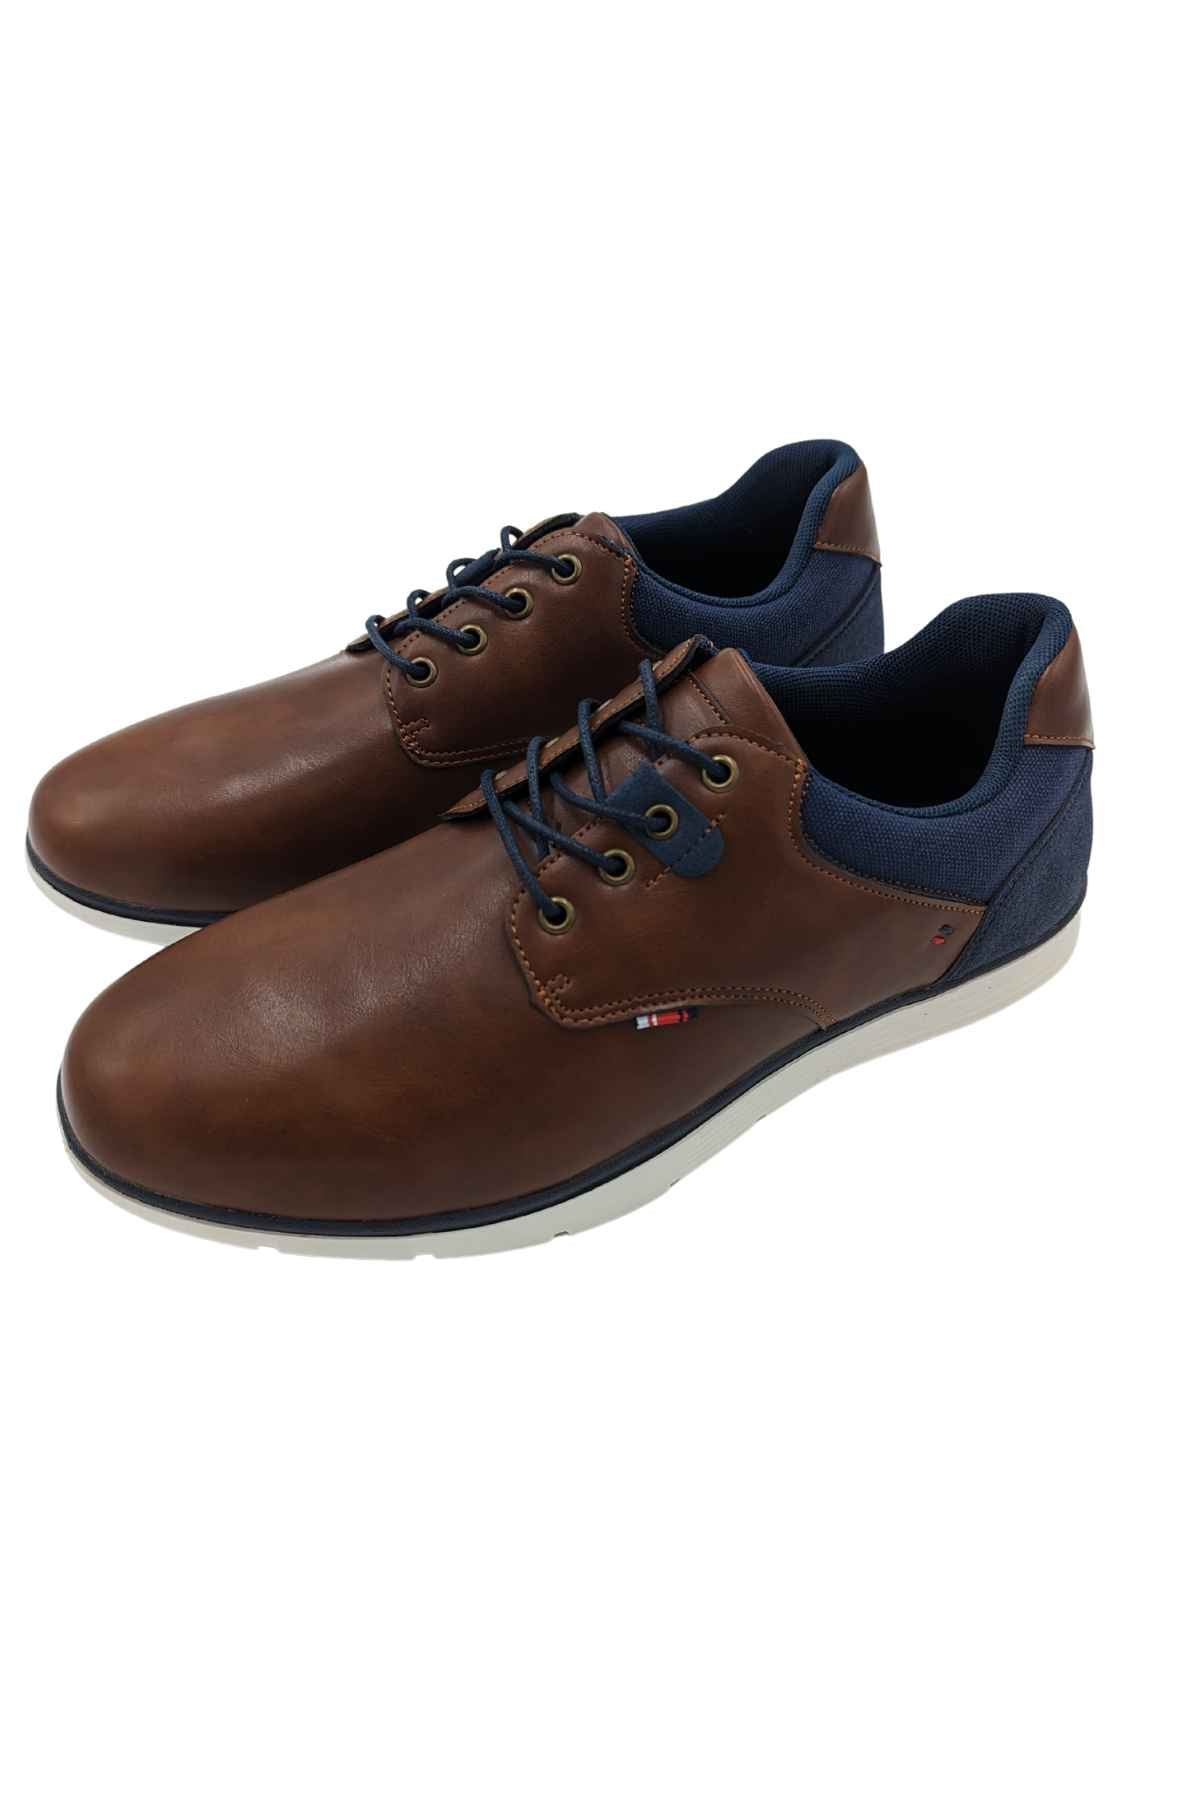 Dolphin Brown Lace Up Shoe-Side view